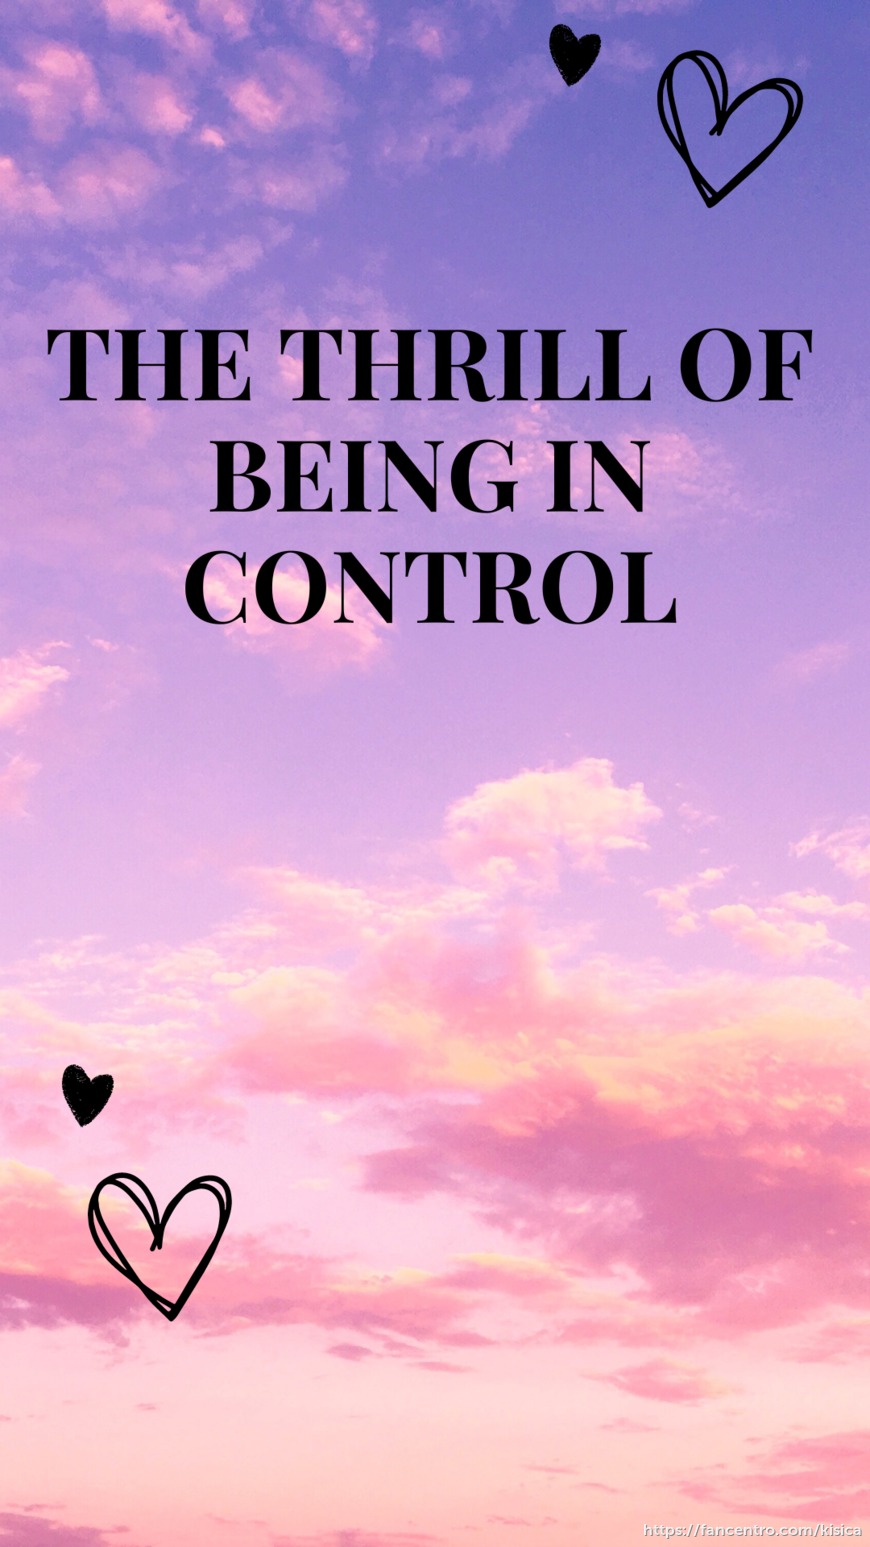 The Thrill of Being in Control